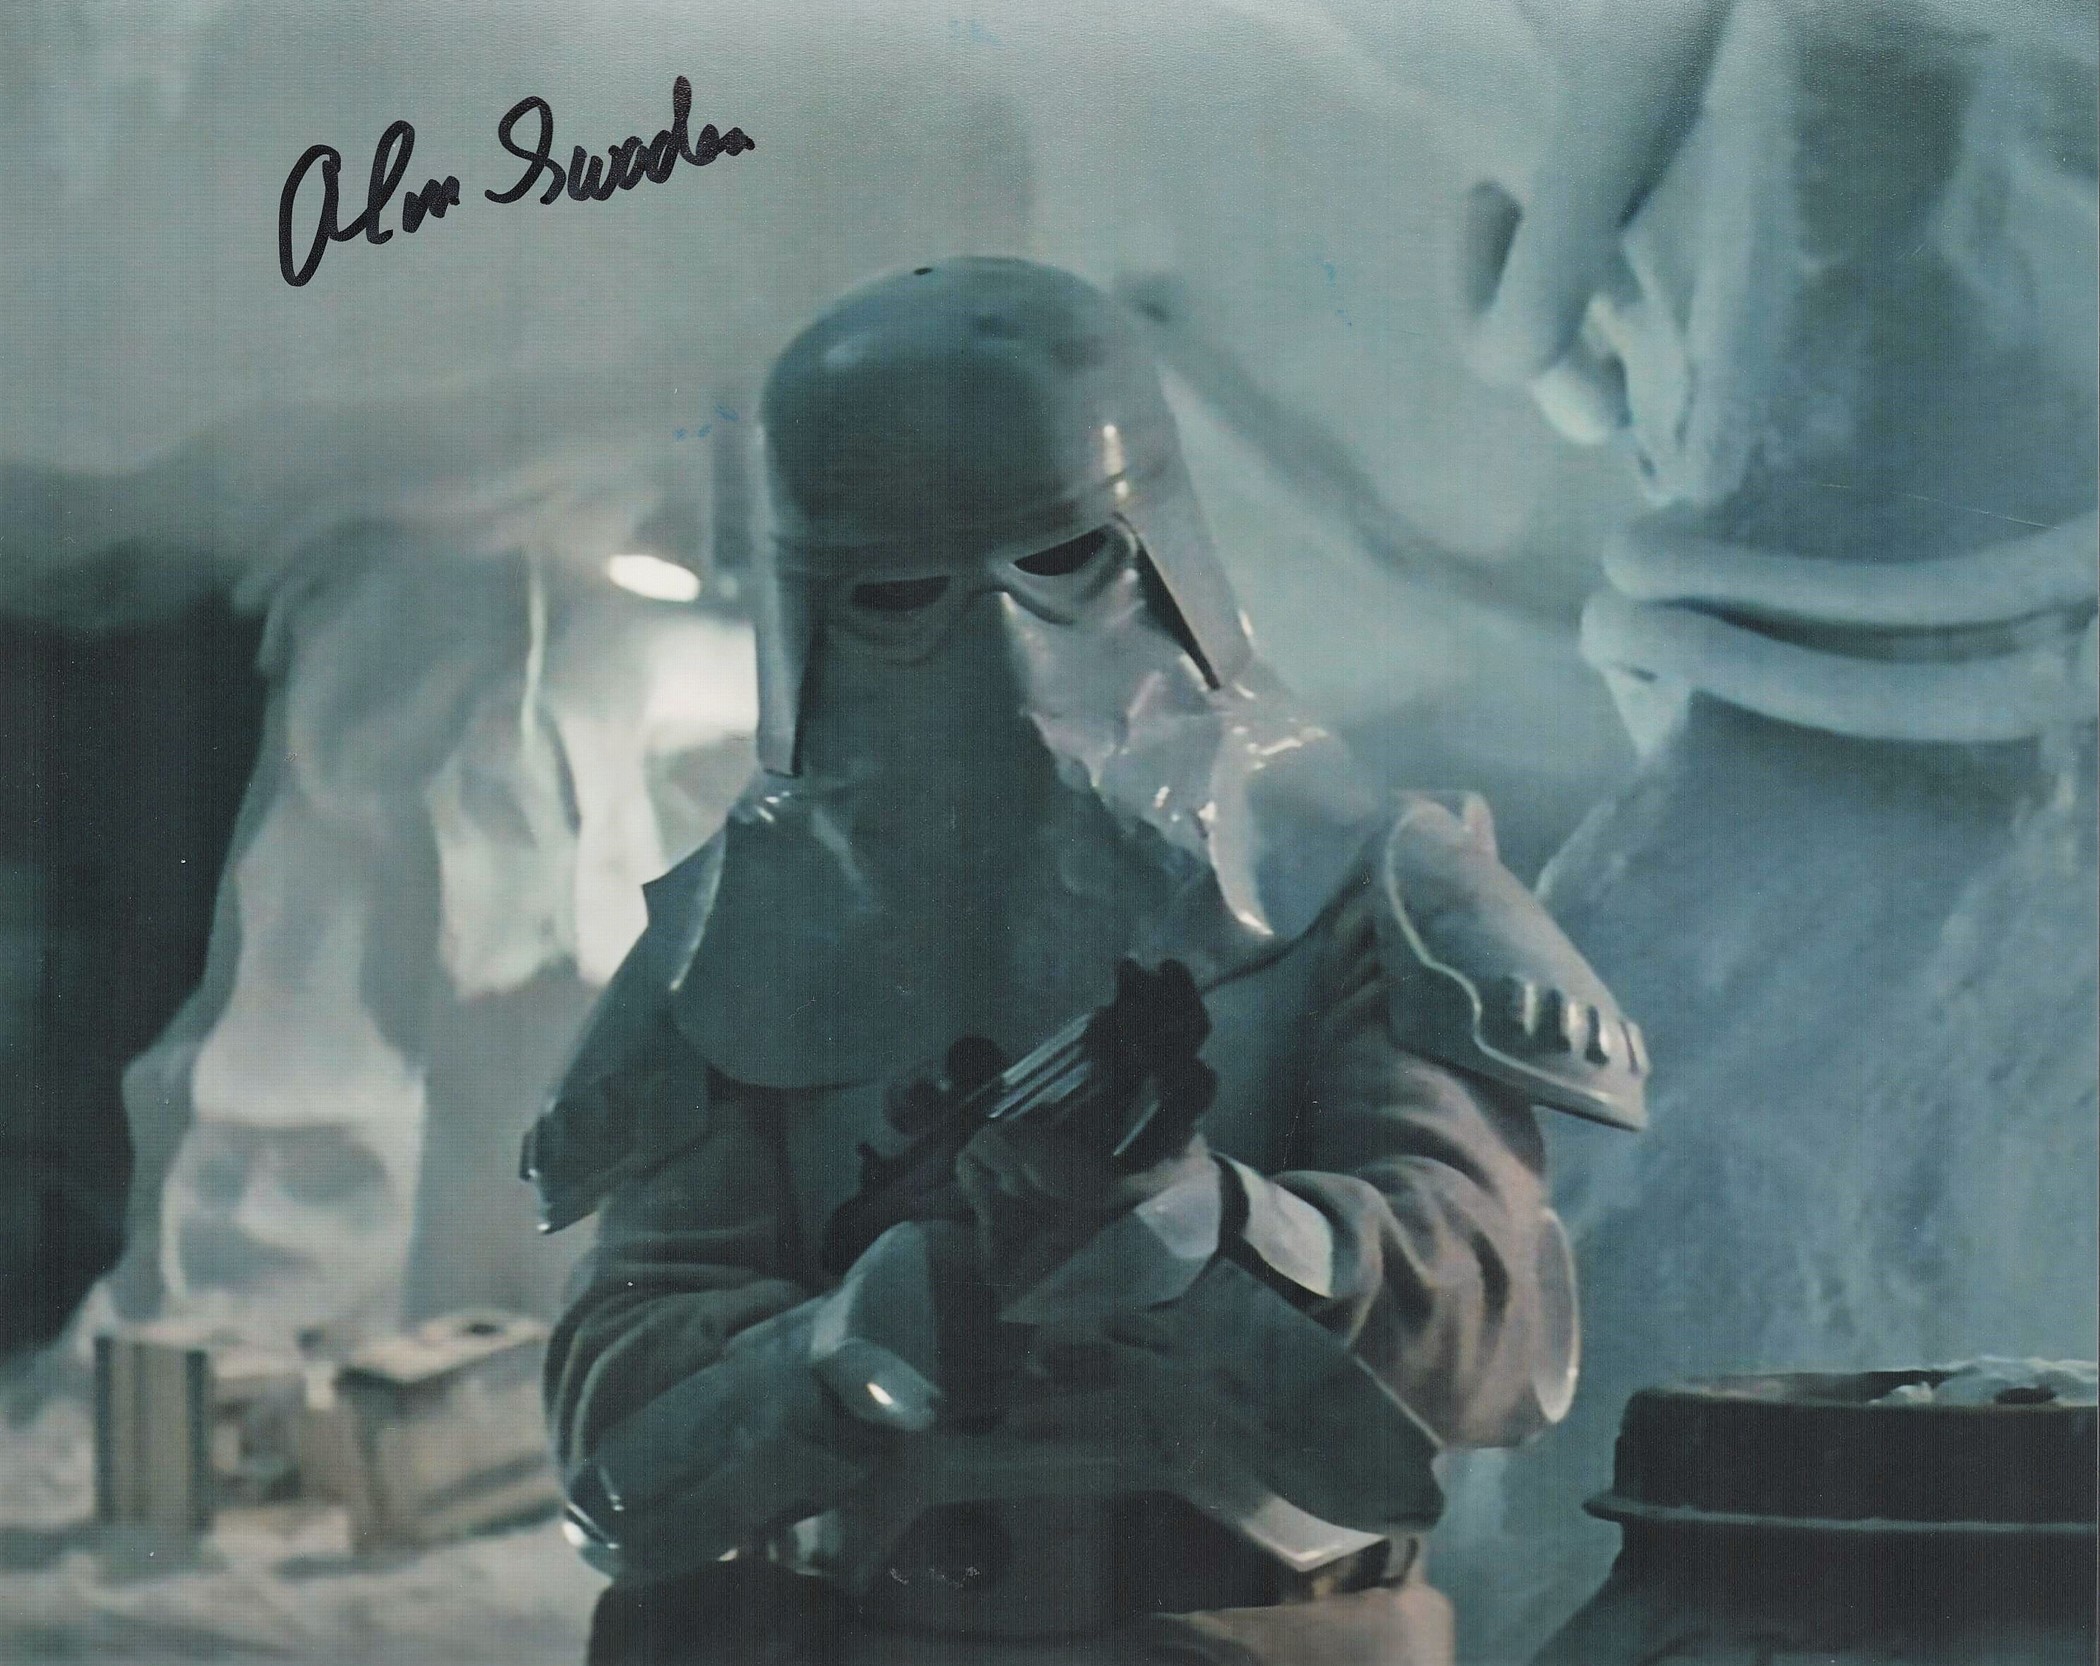 Star Wars Actor, Alan Swaden signed 10x8 colour photograph pictured as a Snowtrooper. All autographs